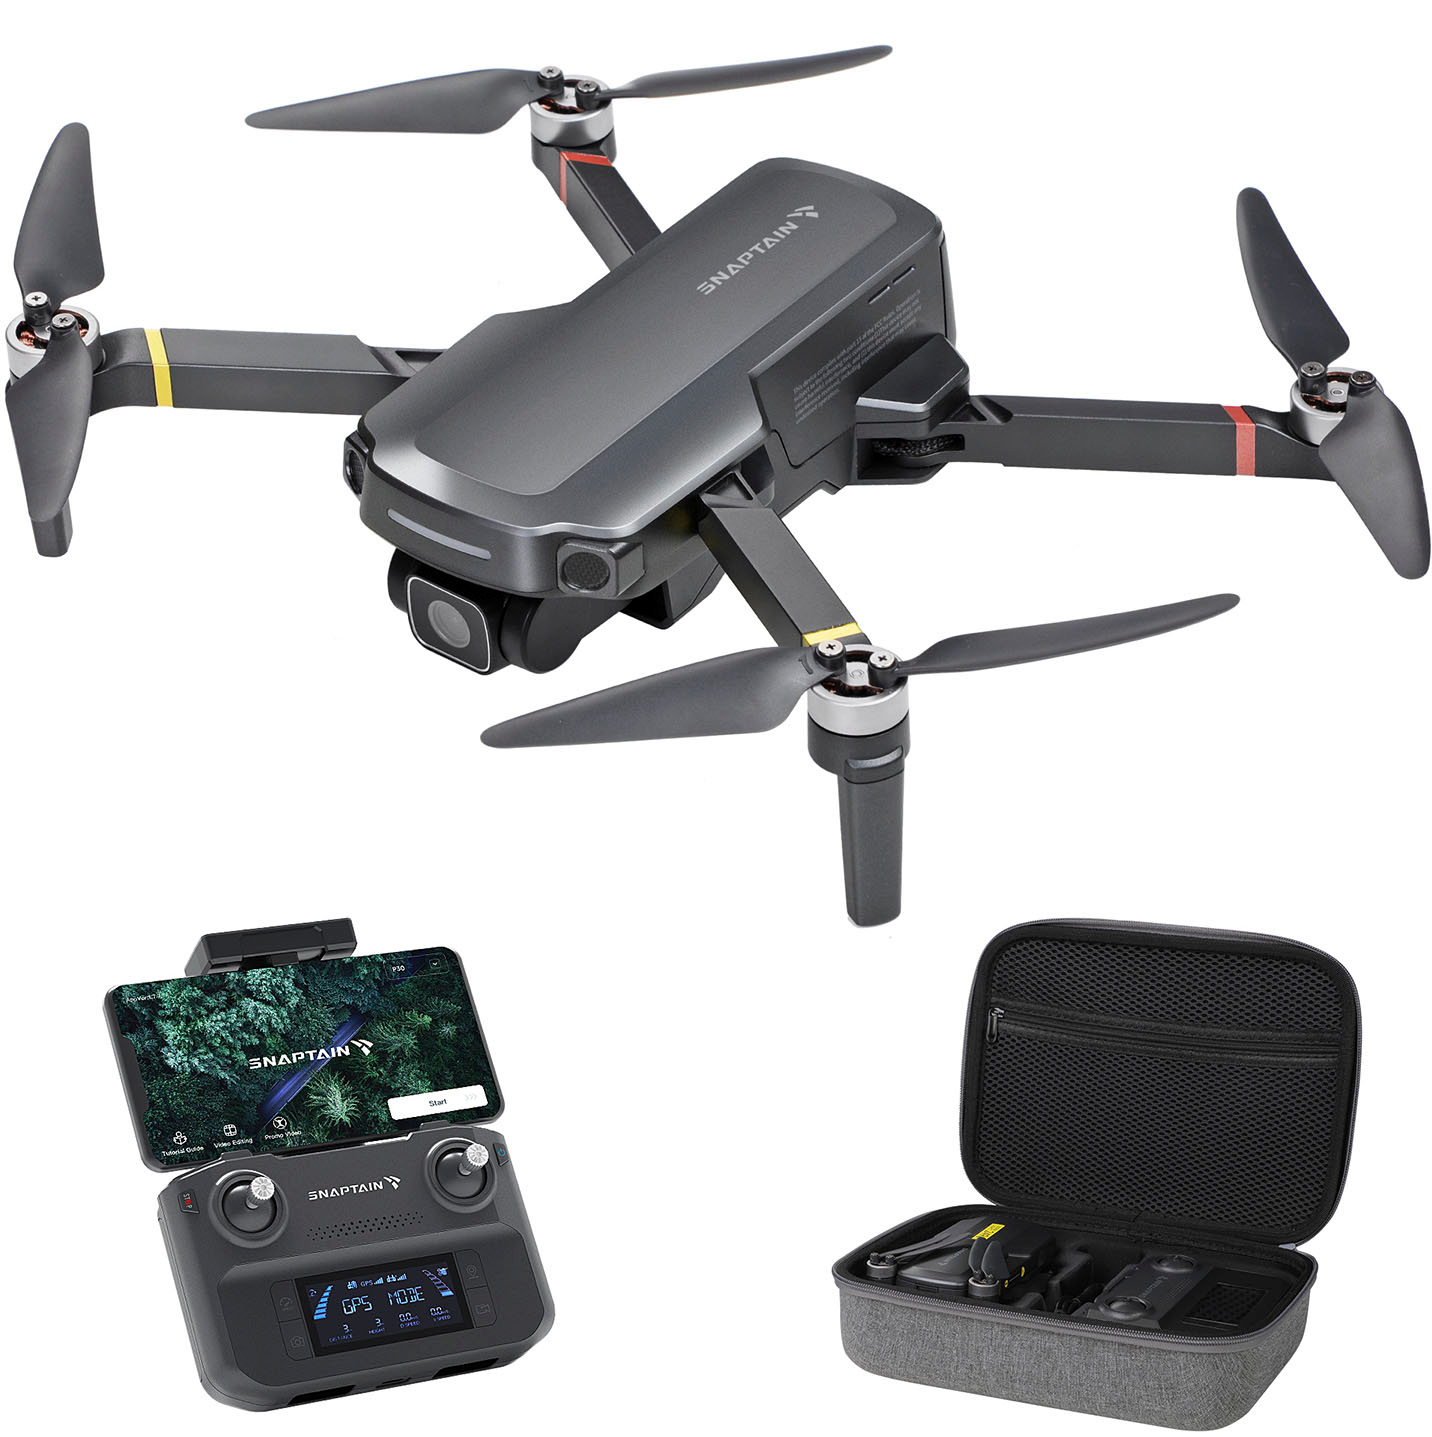 Snaptain P30 GPS Drone with Remote Controller Grey P30 - Best Buy